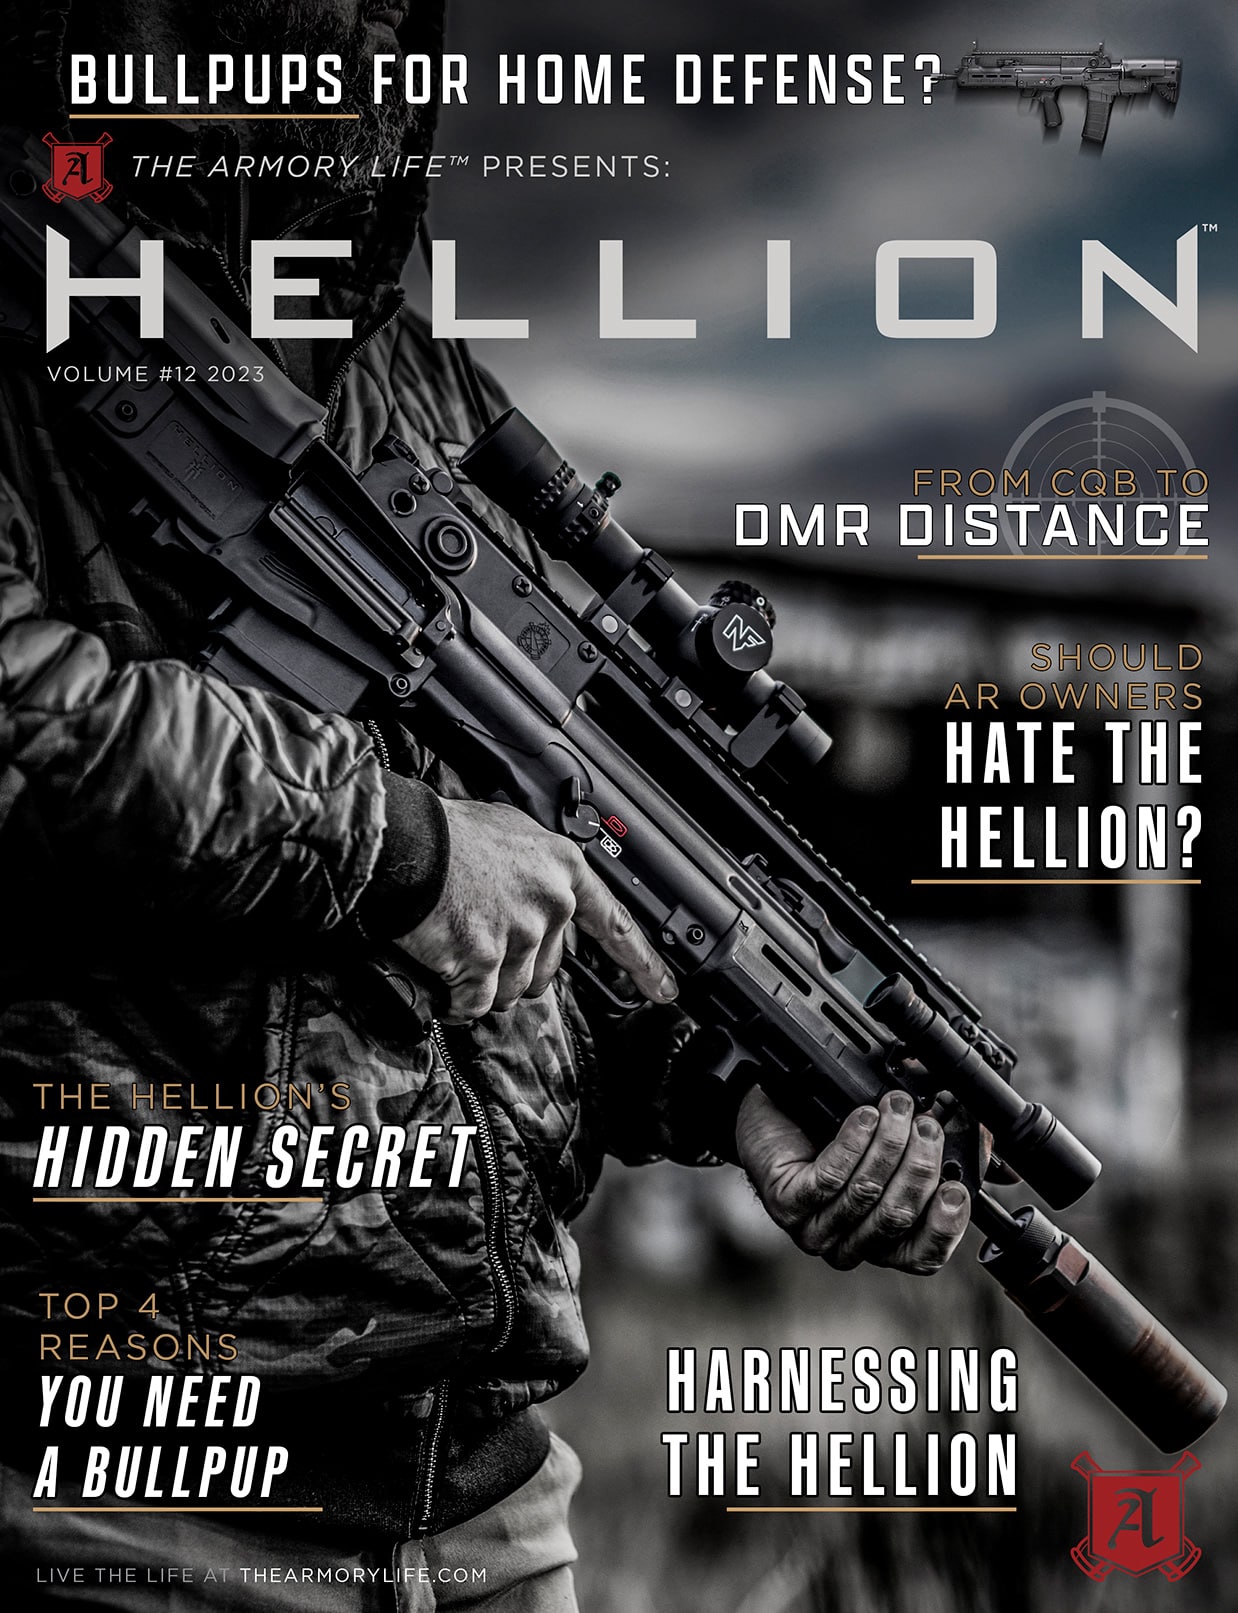 Cover for The Armory Life Digital Magazine Volume 12: Hellion